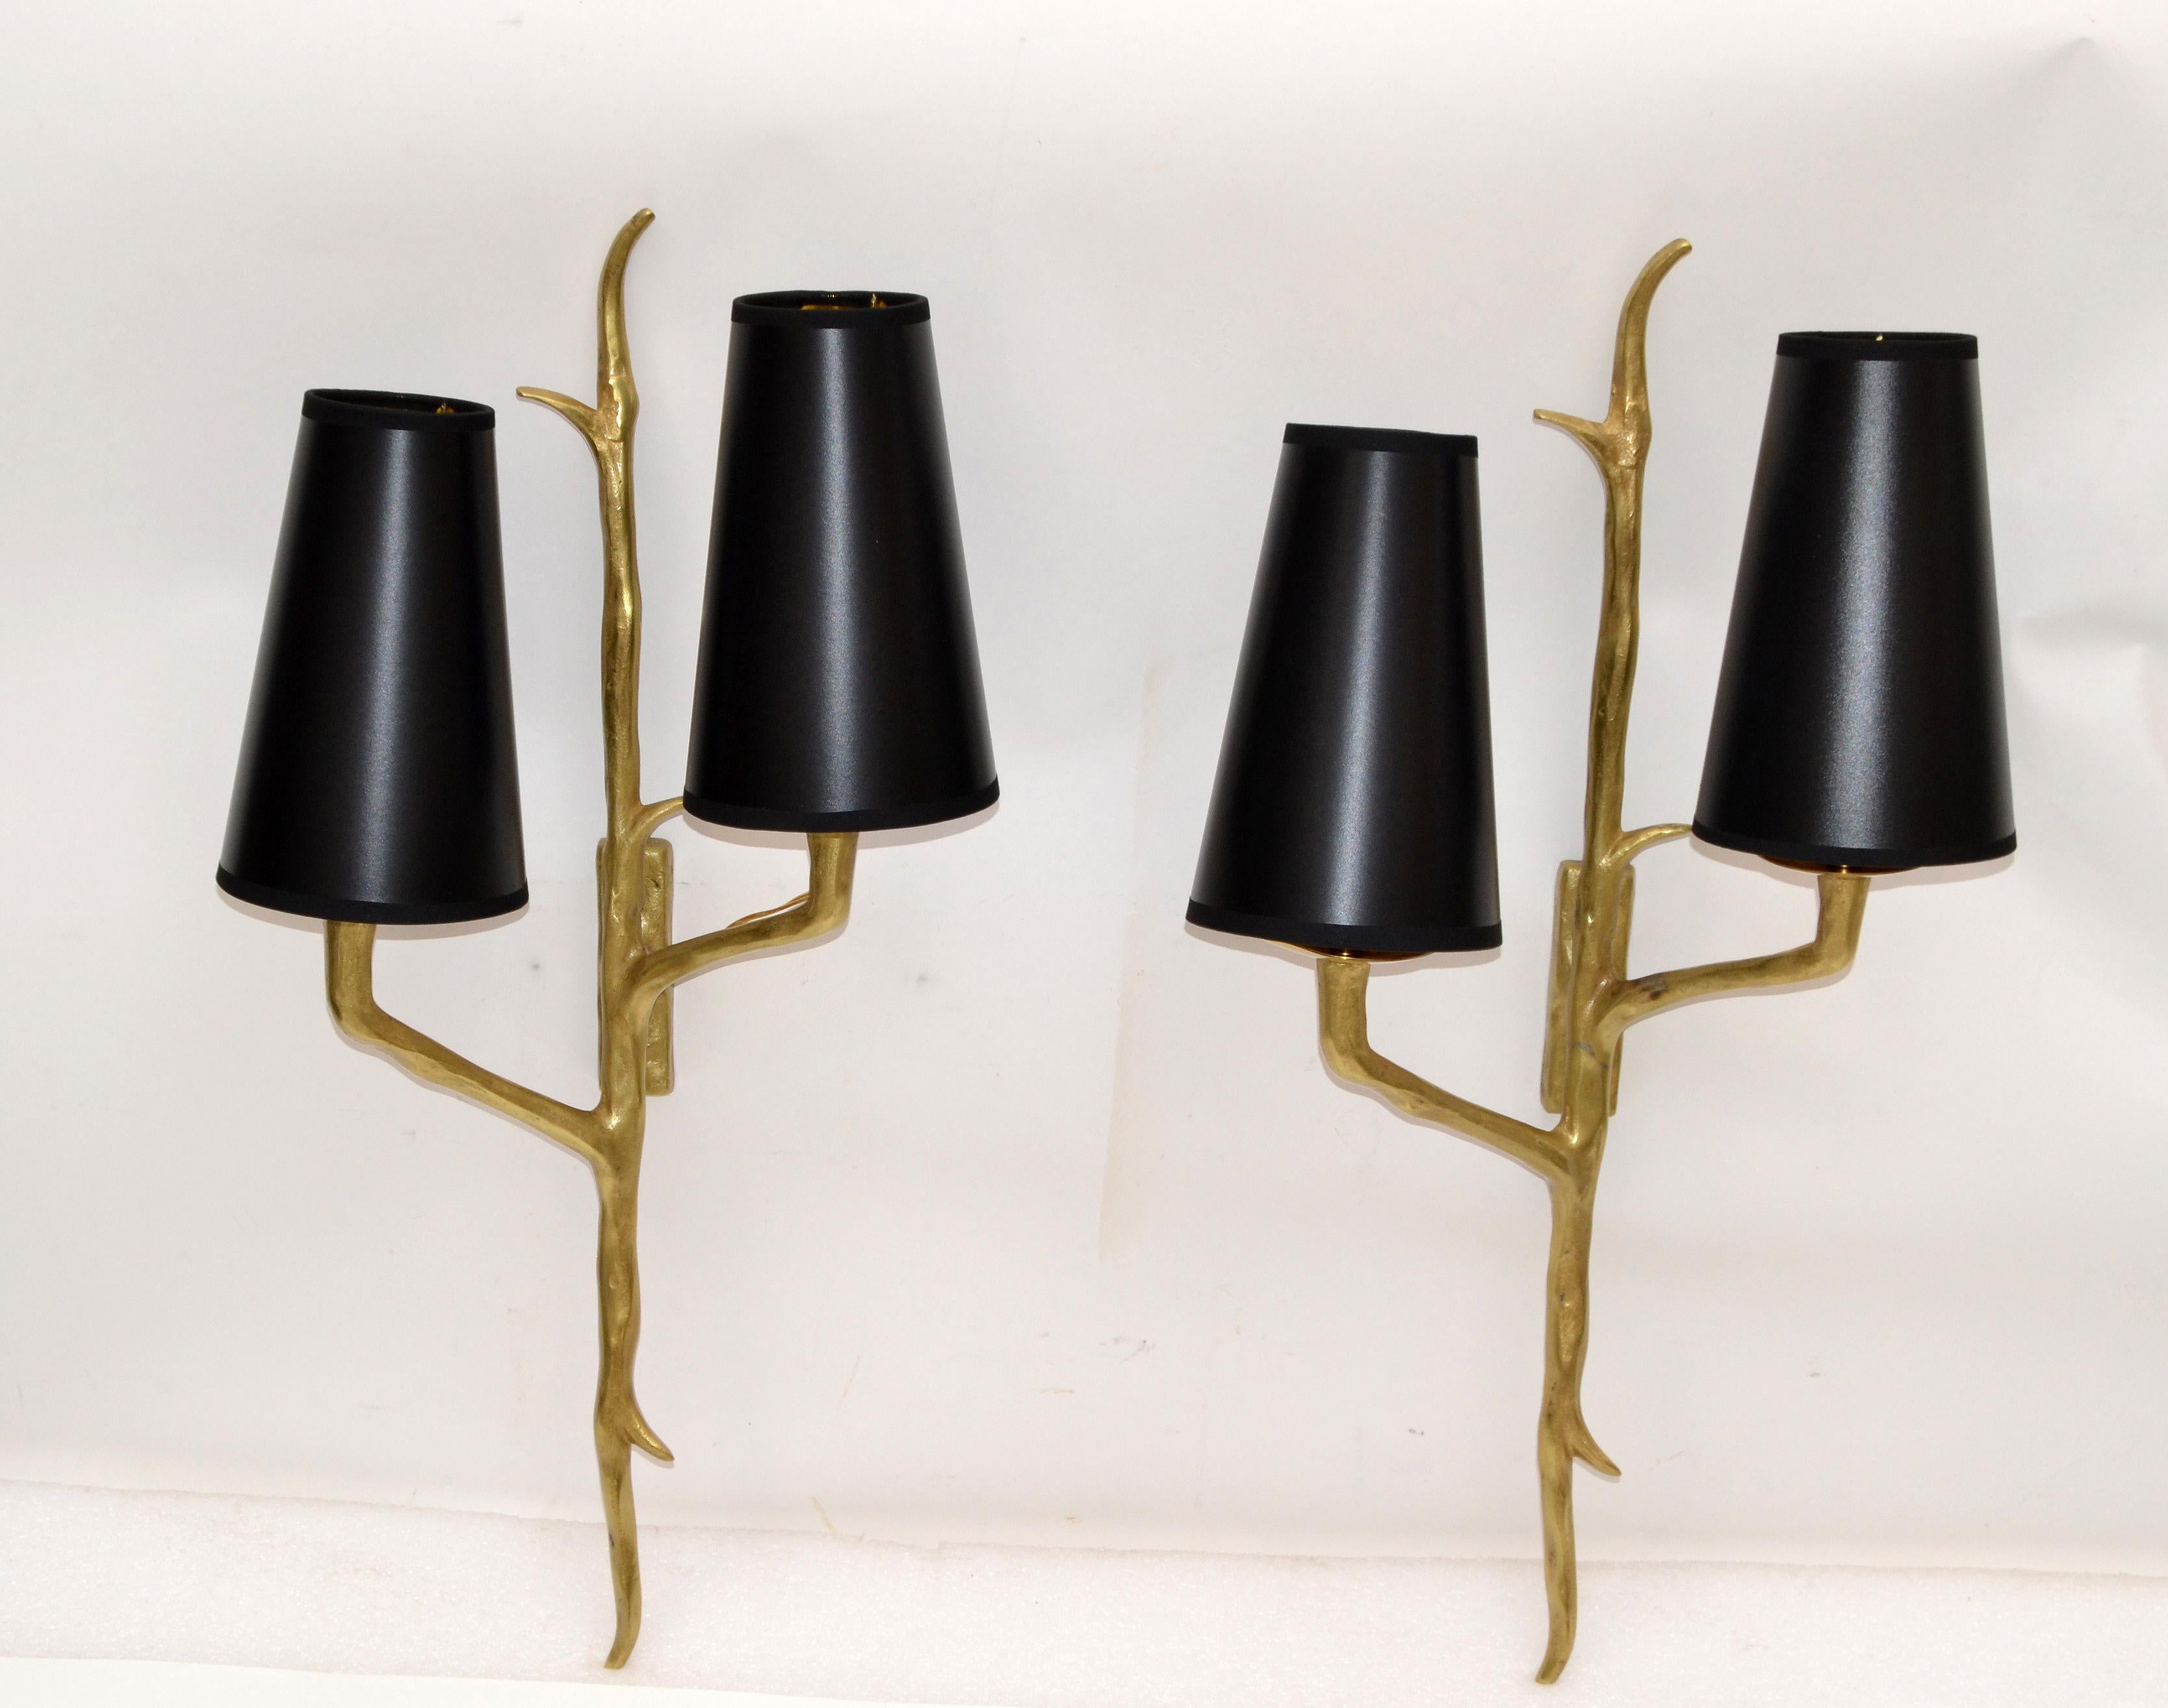 Pair of Agostini Style Sconces Bronze with Black and Gold Shades, France, 1950s For Sale 4